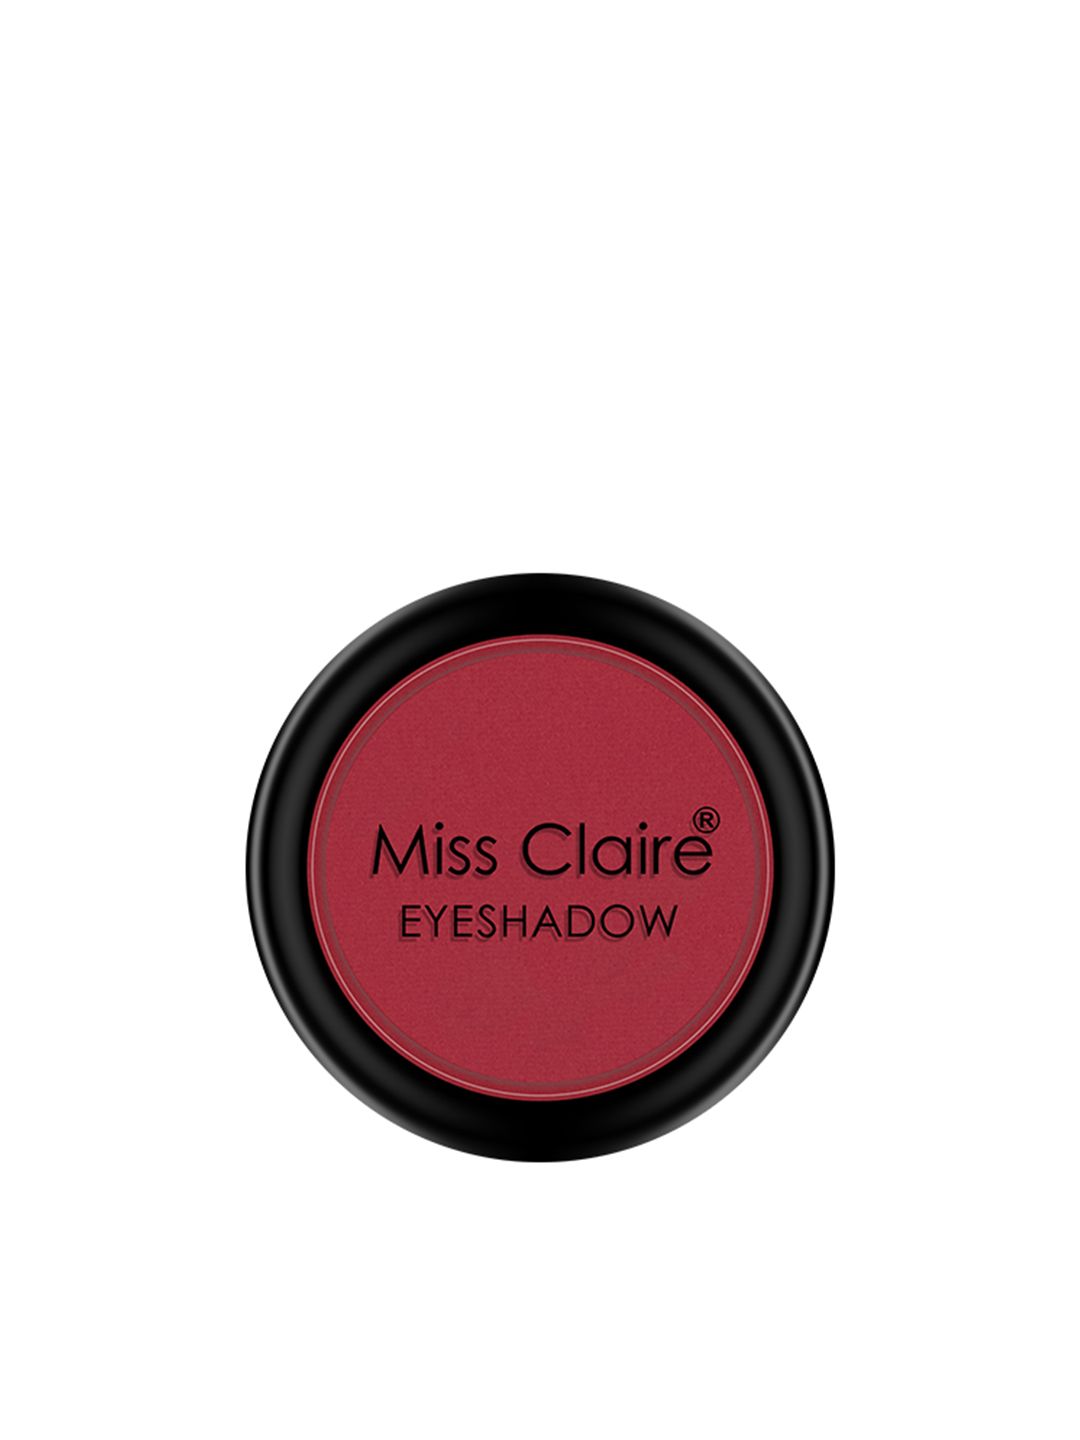 Miss Claire 0509 Single Eyeshadow Price in India